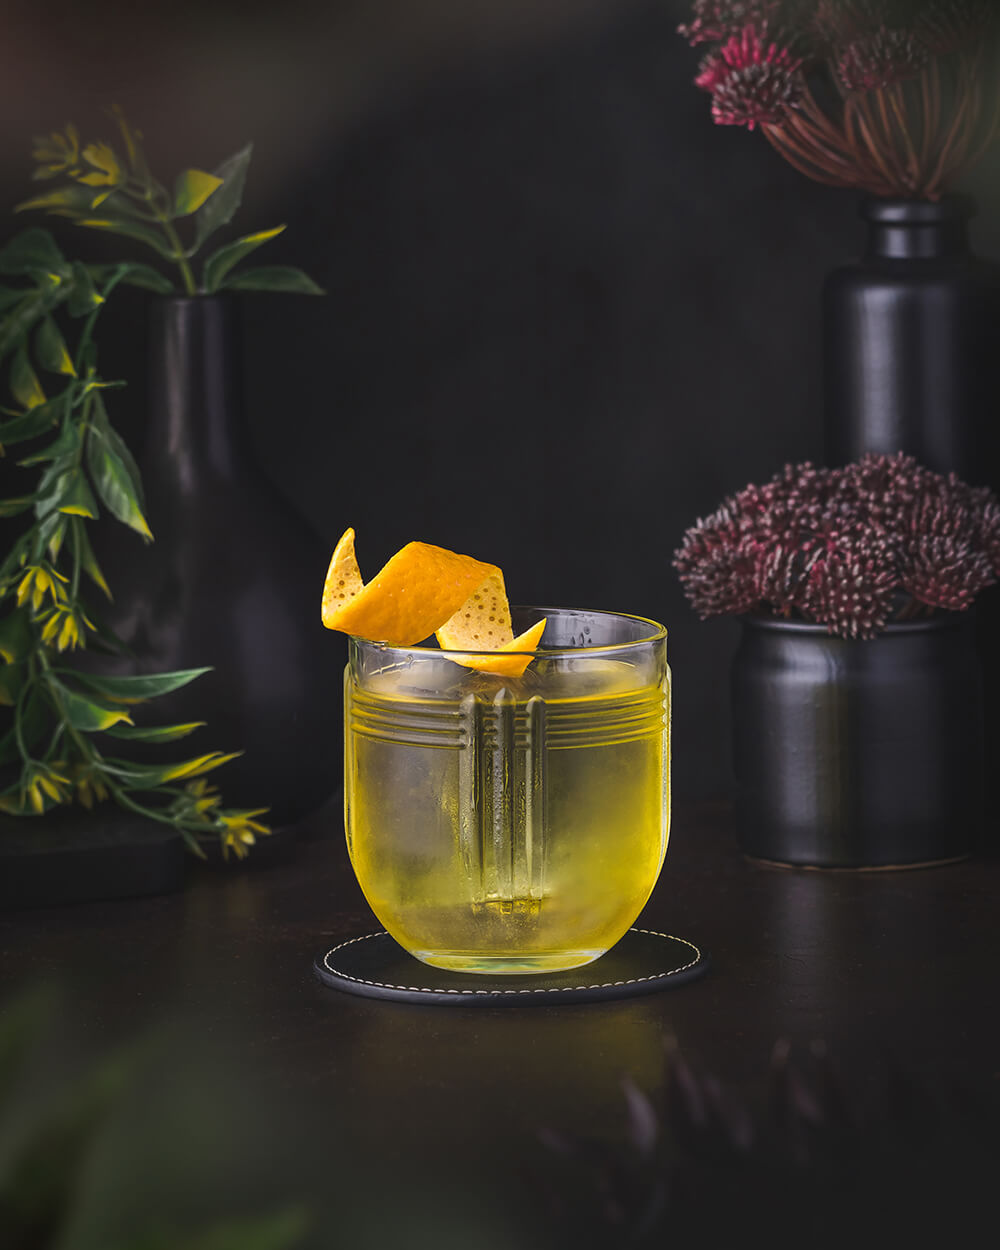 White Negroni - Yellow Gin based cocktail with grapefruit garnish served in a tumbler